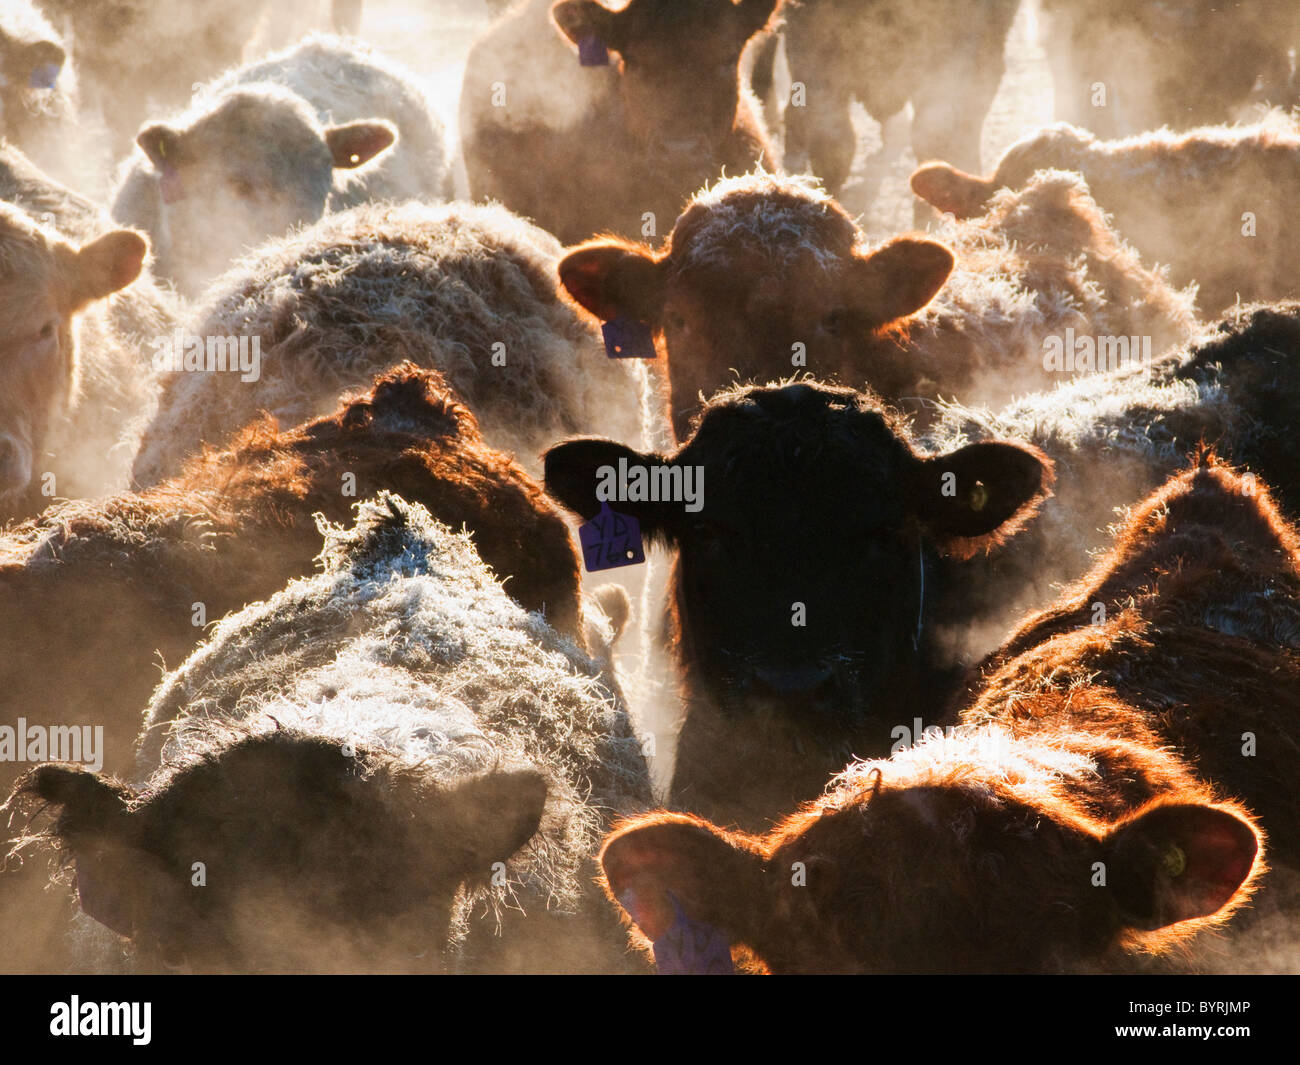 Livestock - Crossbred and mixed breeds of beef cattle in a feedlot pen on a frosty Winter morning at sunrise / Alberta, Canada. Stock Photo